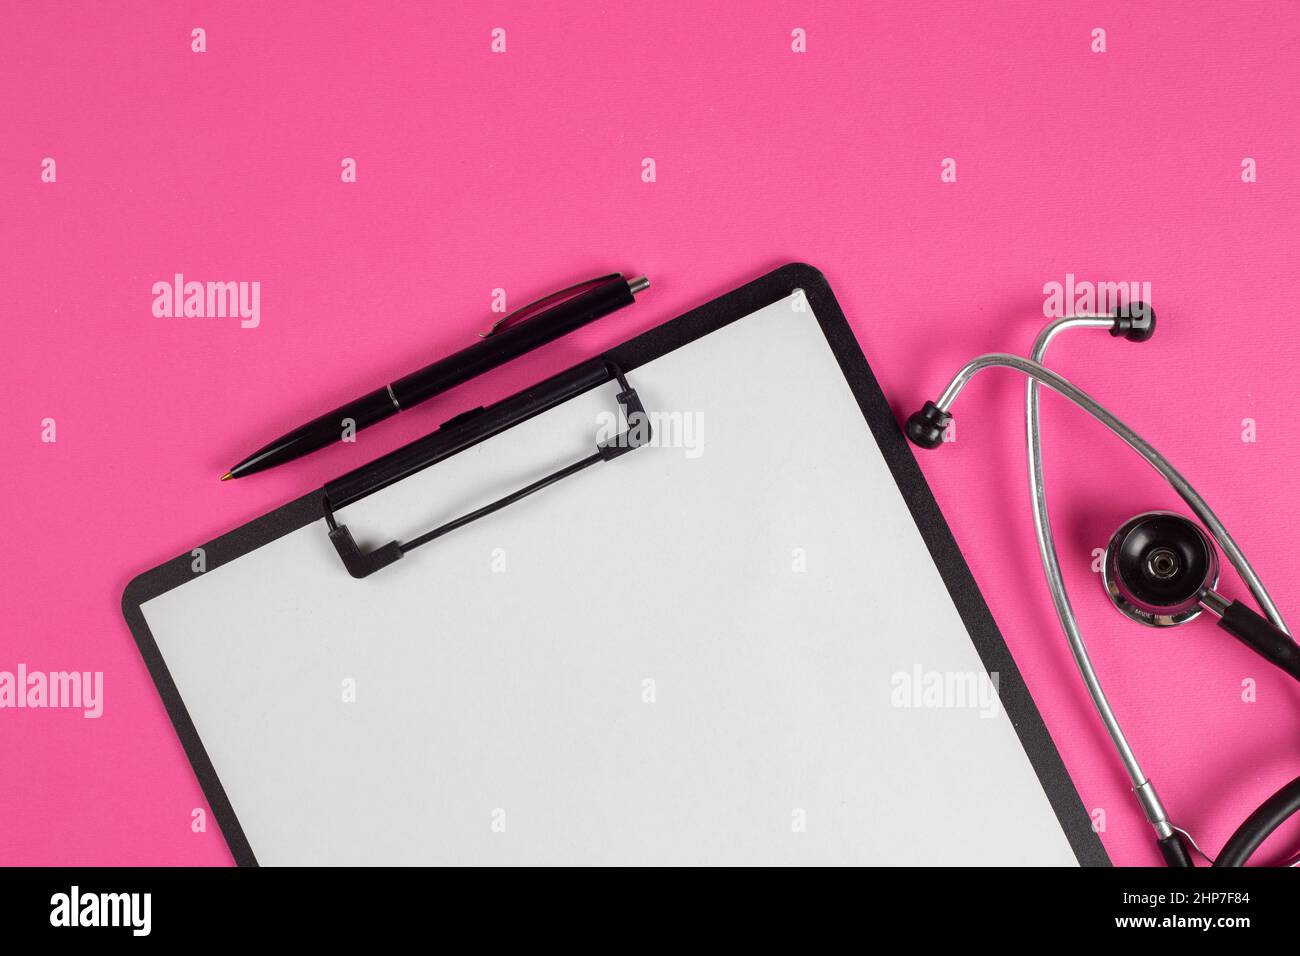 Treatment plan for a patient, doctor's desk top view. Stethoscope, note pad, medical concept Stock Photo